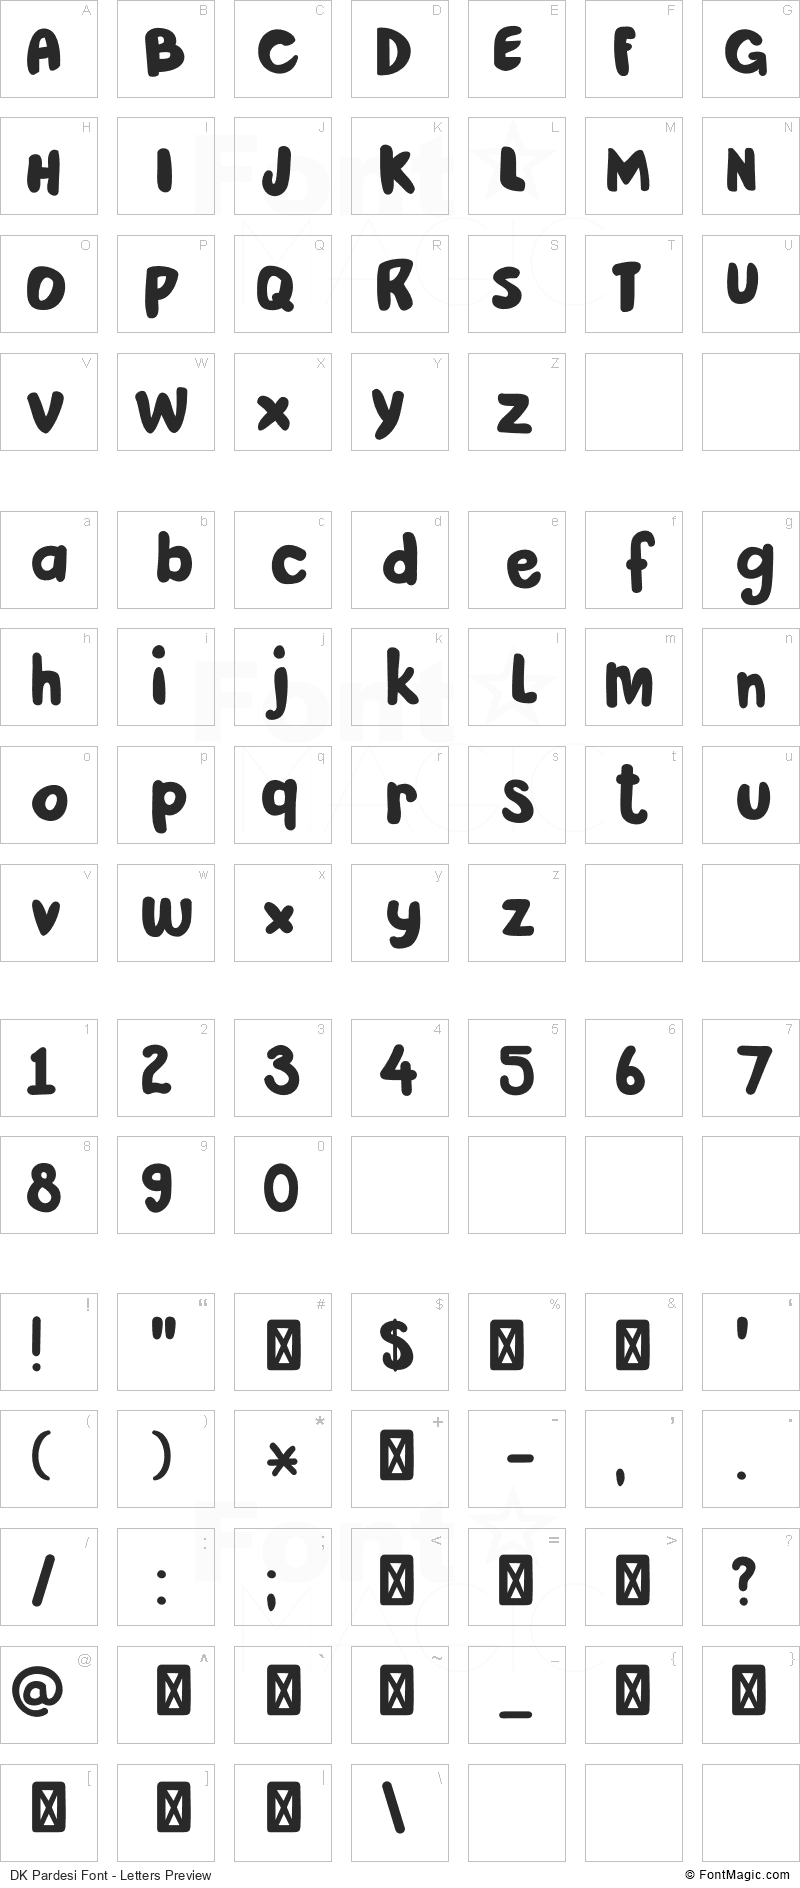 DK Pardesi Font - All Latters Preview Chart